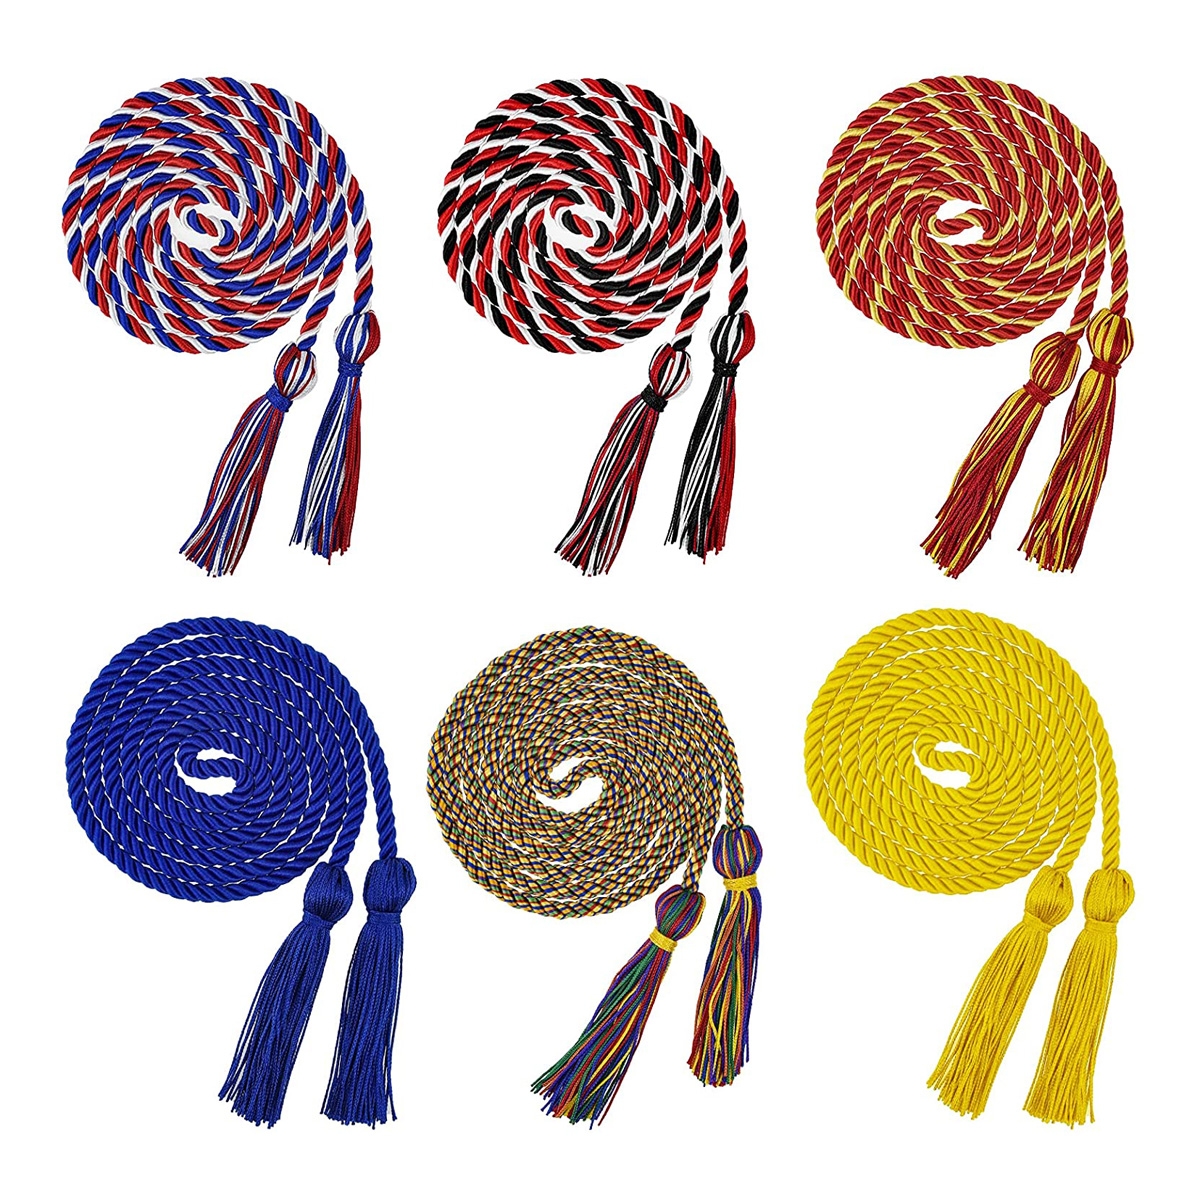 Tassels Cord Honor Cords with Tassel Graduation Honor Cords for Graduation Students